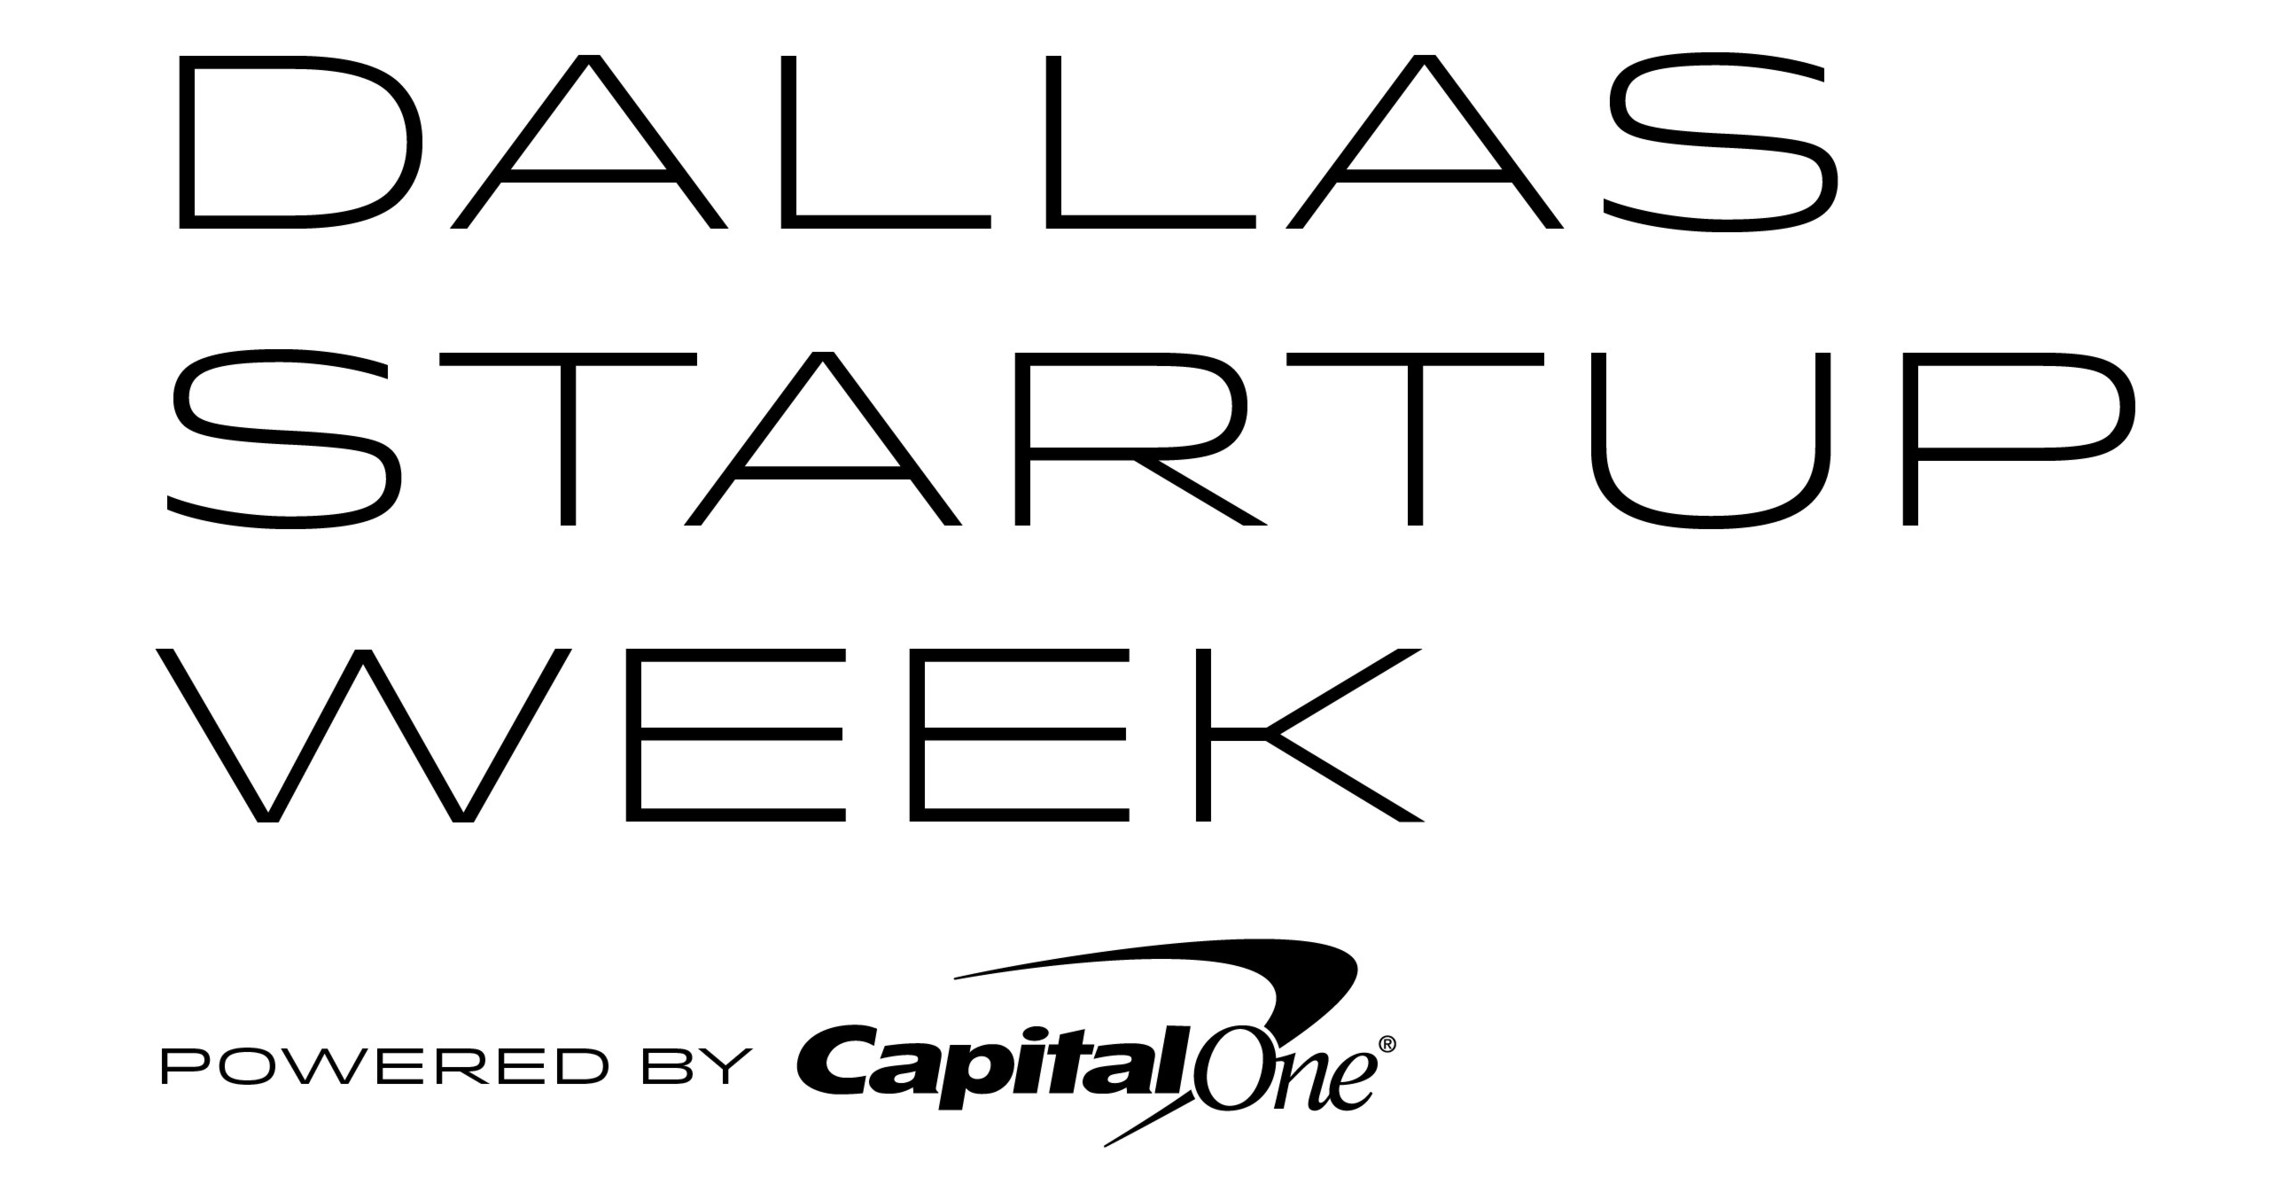 Dallas Startup Week Projected to Connect 10,000 Entrepreneurs and